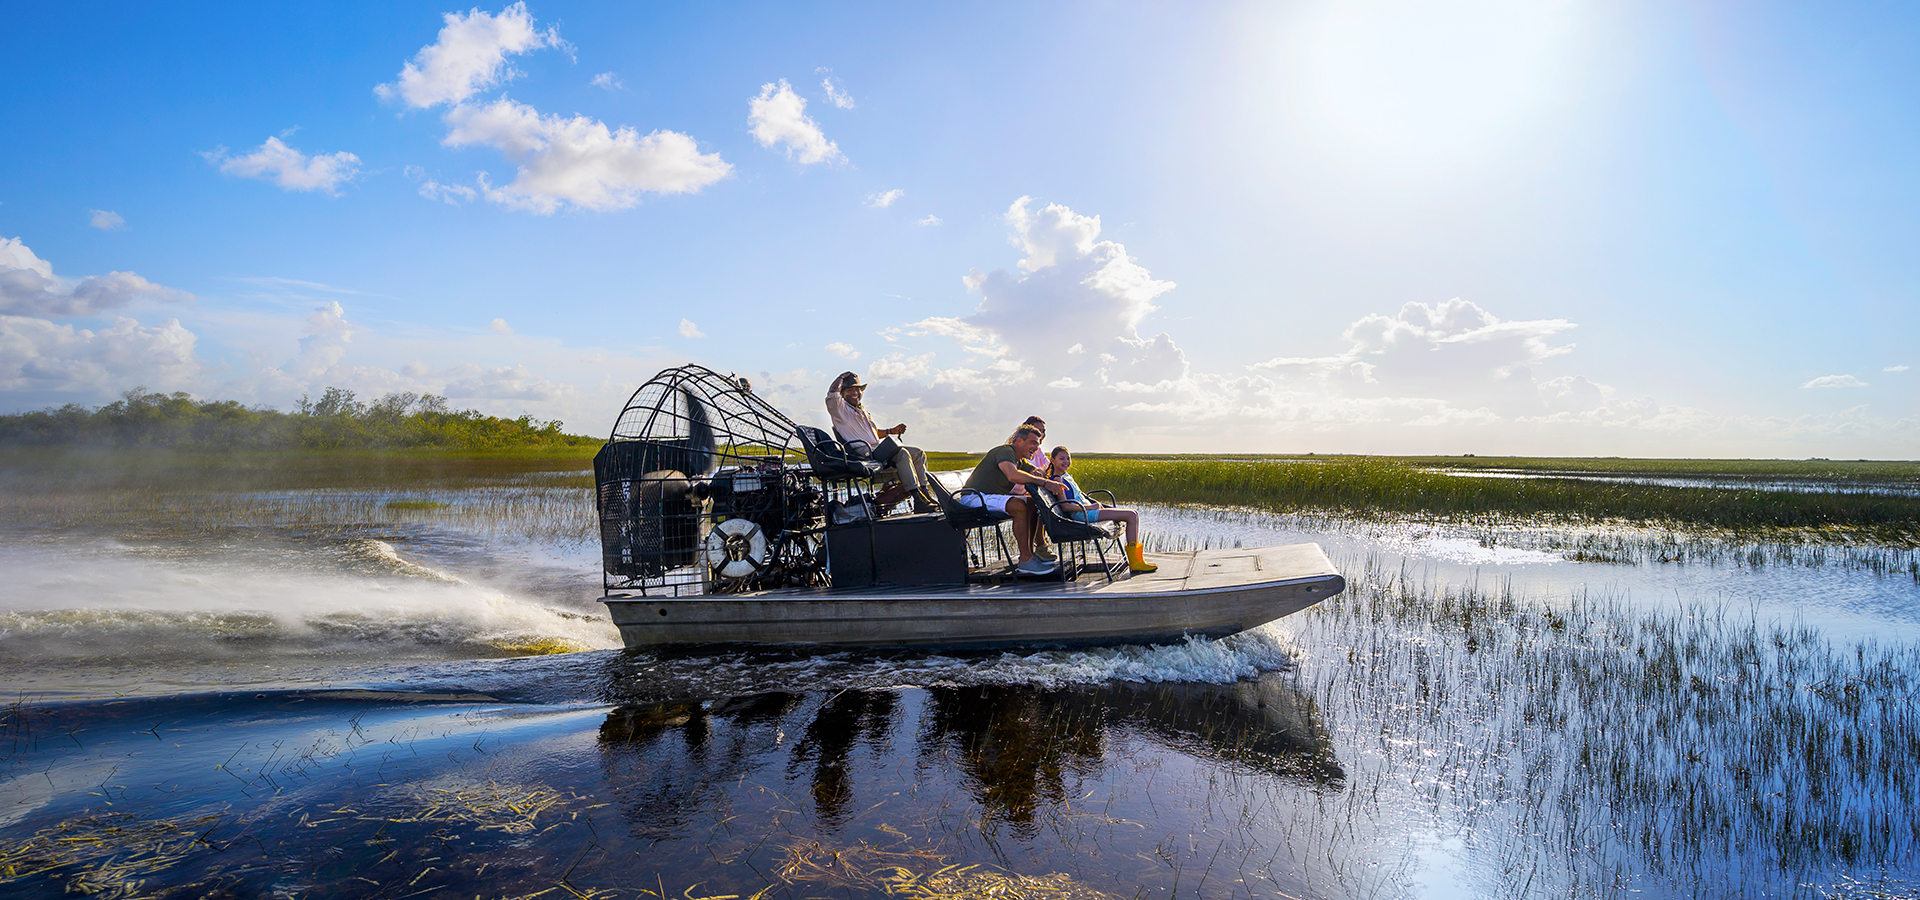 Everglades National Park Airboat rides